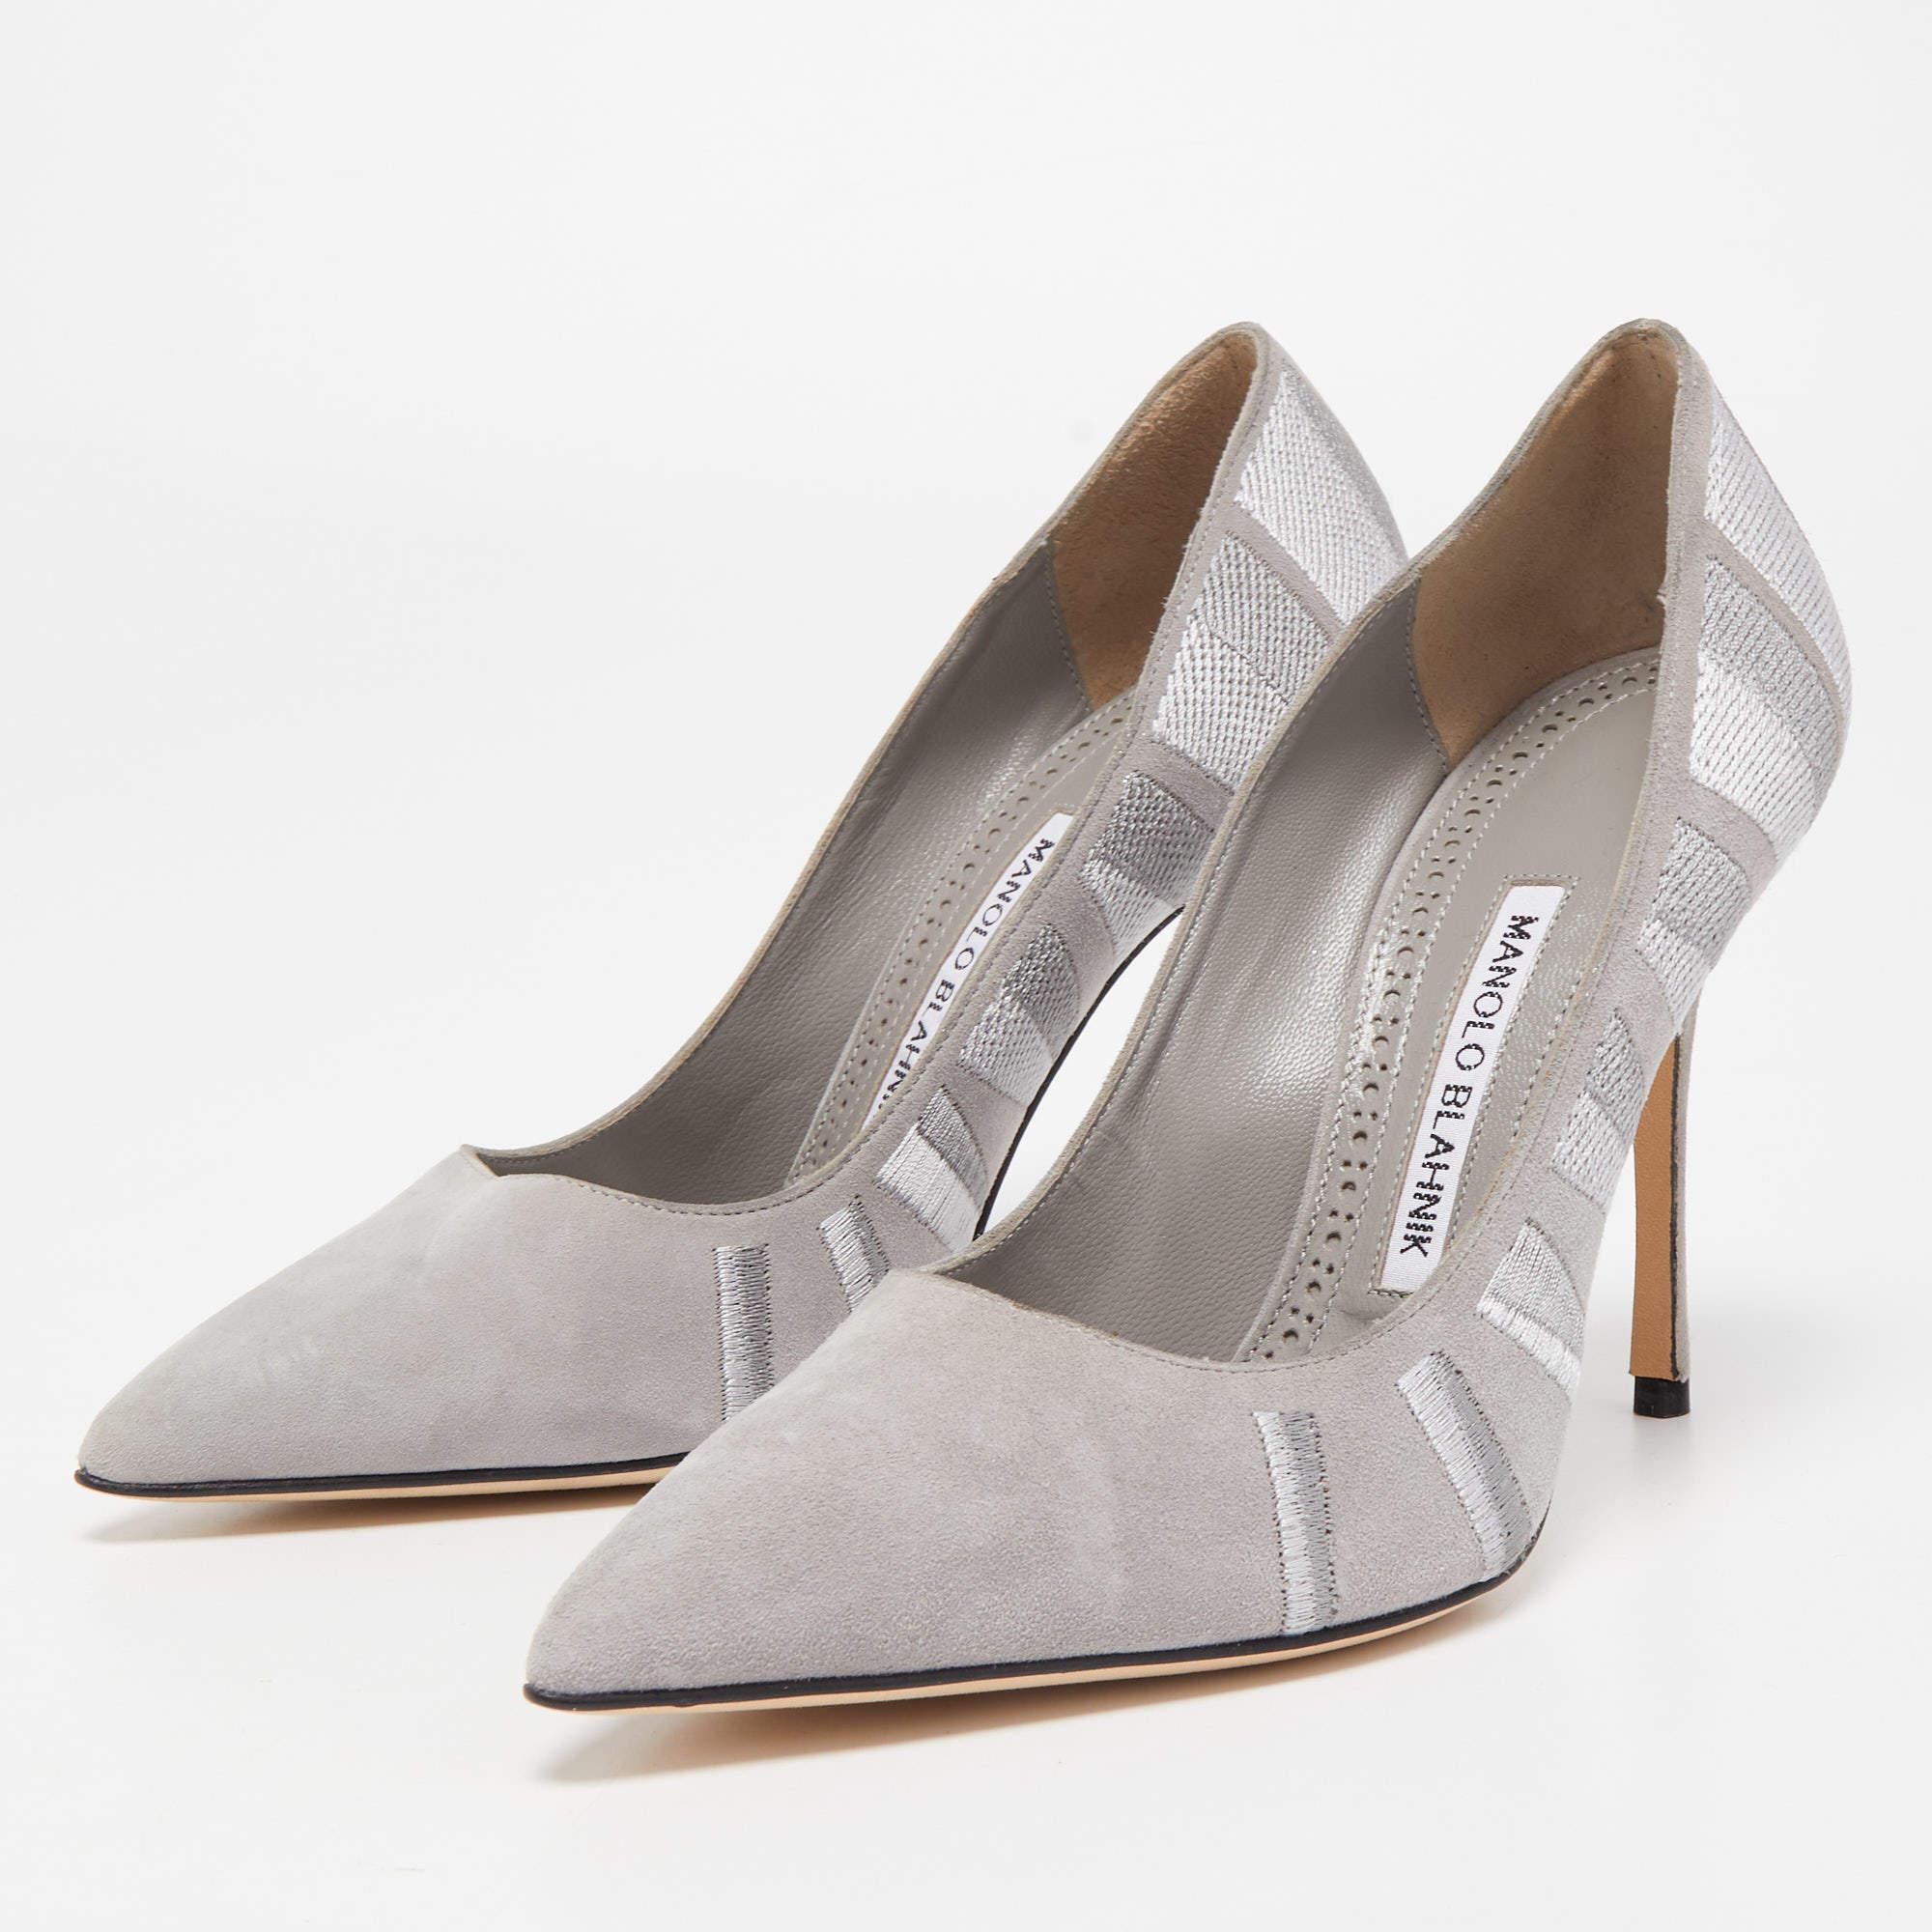 There are some shoes that stand the test of time and fashion cycles, these timeless Manolo Blahnik pumps are classics that will last you season after season. Crafted from suede in a grey shade, they are designed with sleek cuts, pointed-toes, and